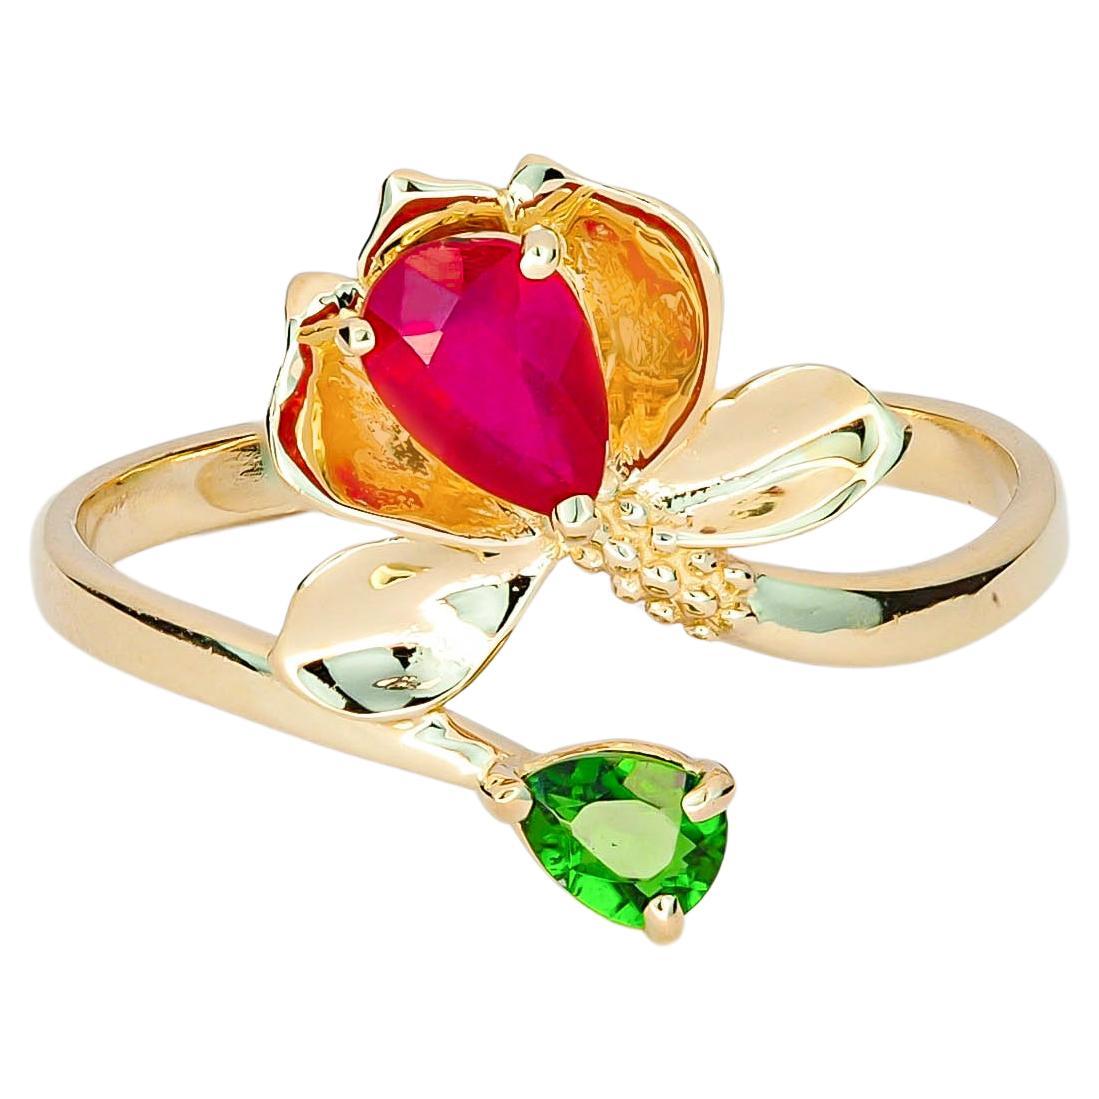 14 K Gold Ring with Ruby and Chrome Diopside. Water Lily Flower Gold Ring!